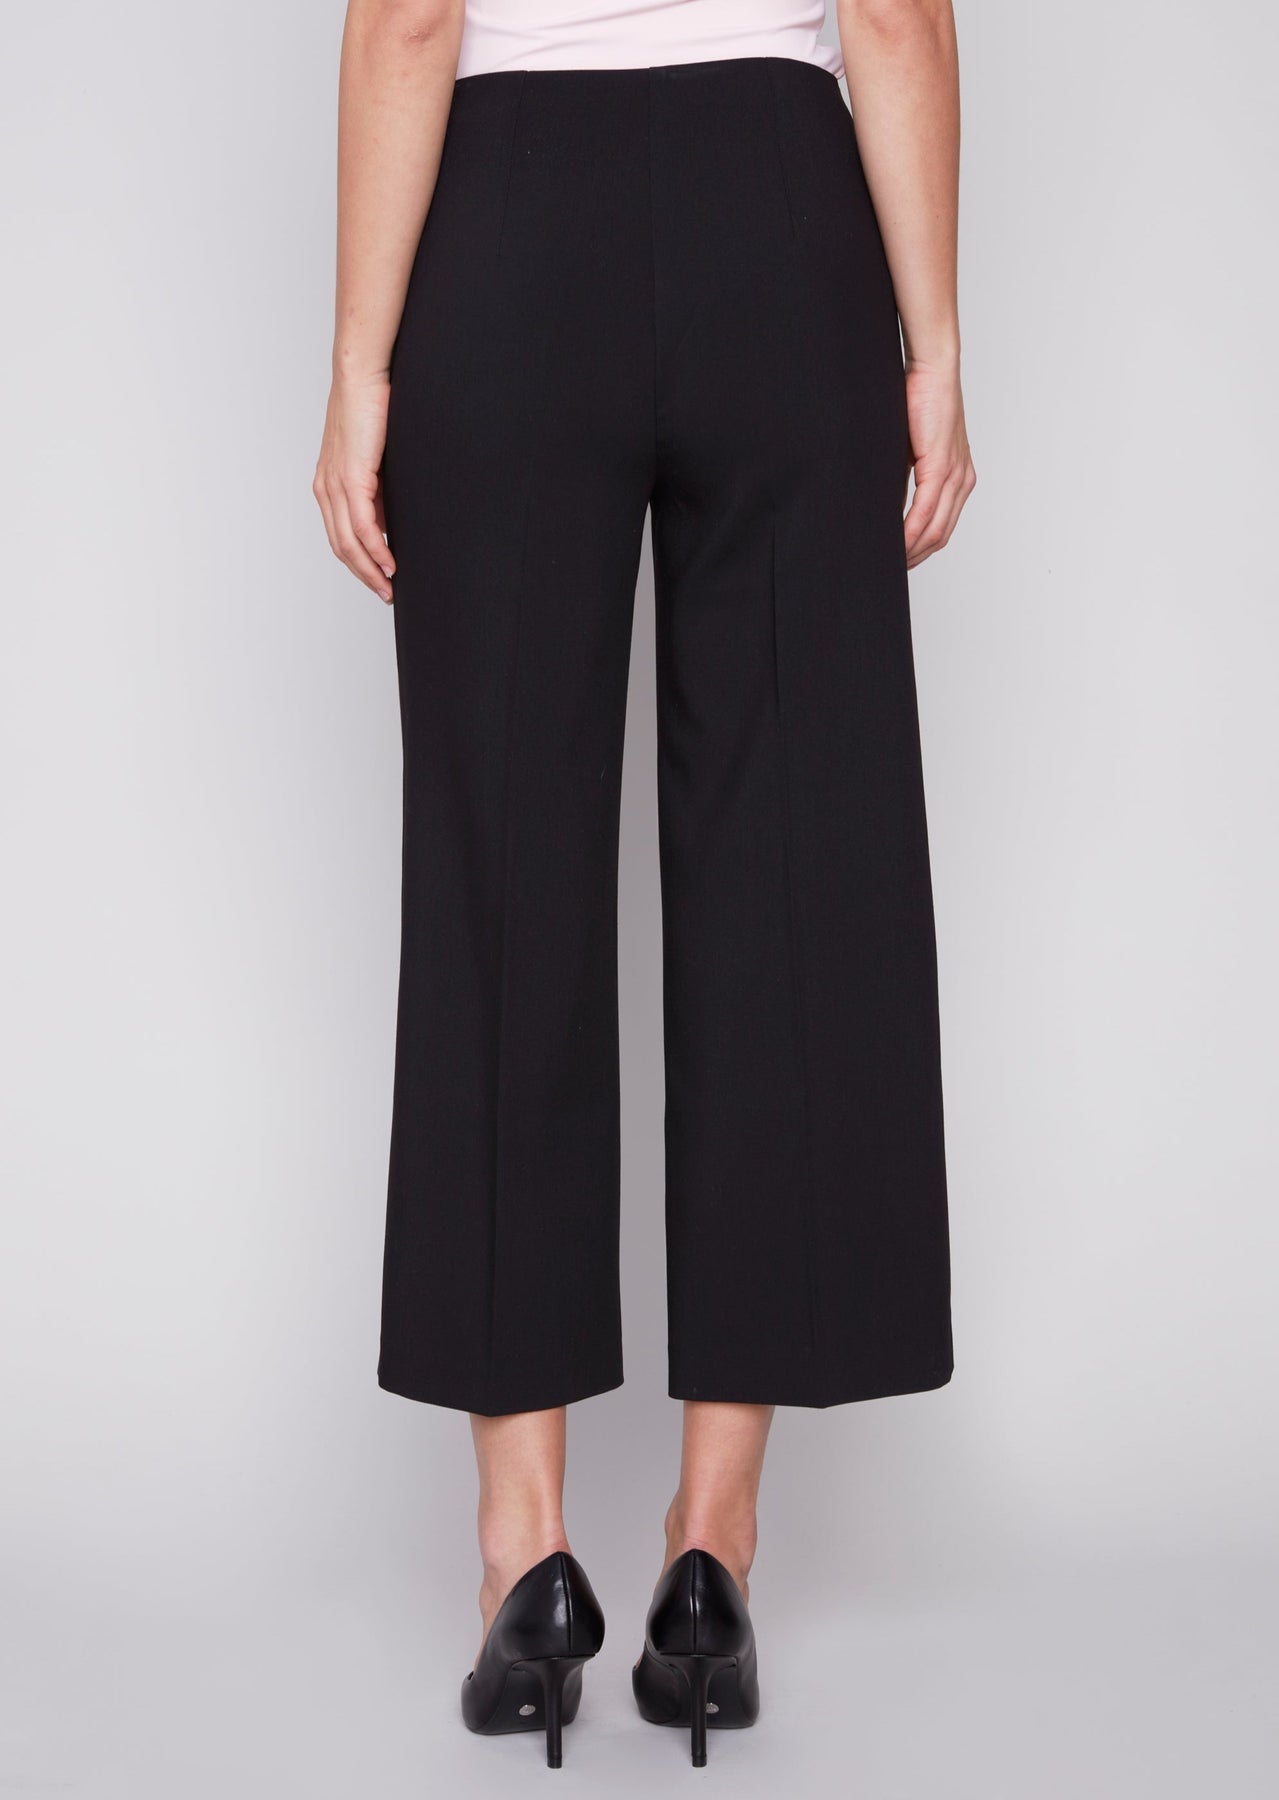 Pants With Side zipper and Wide Leg - Black